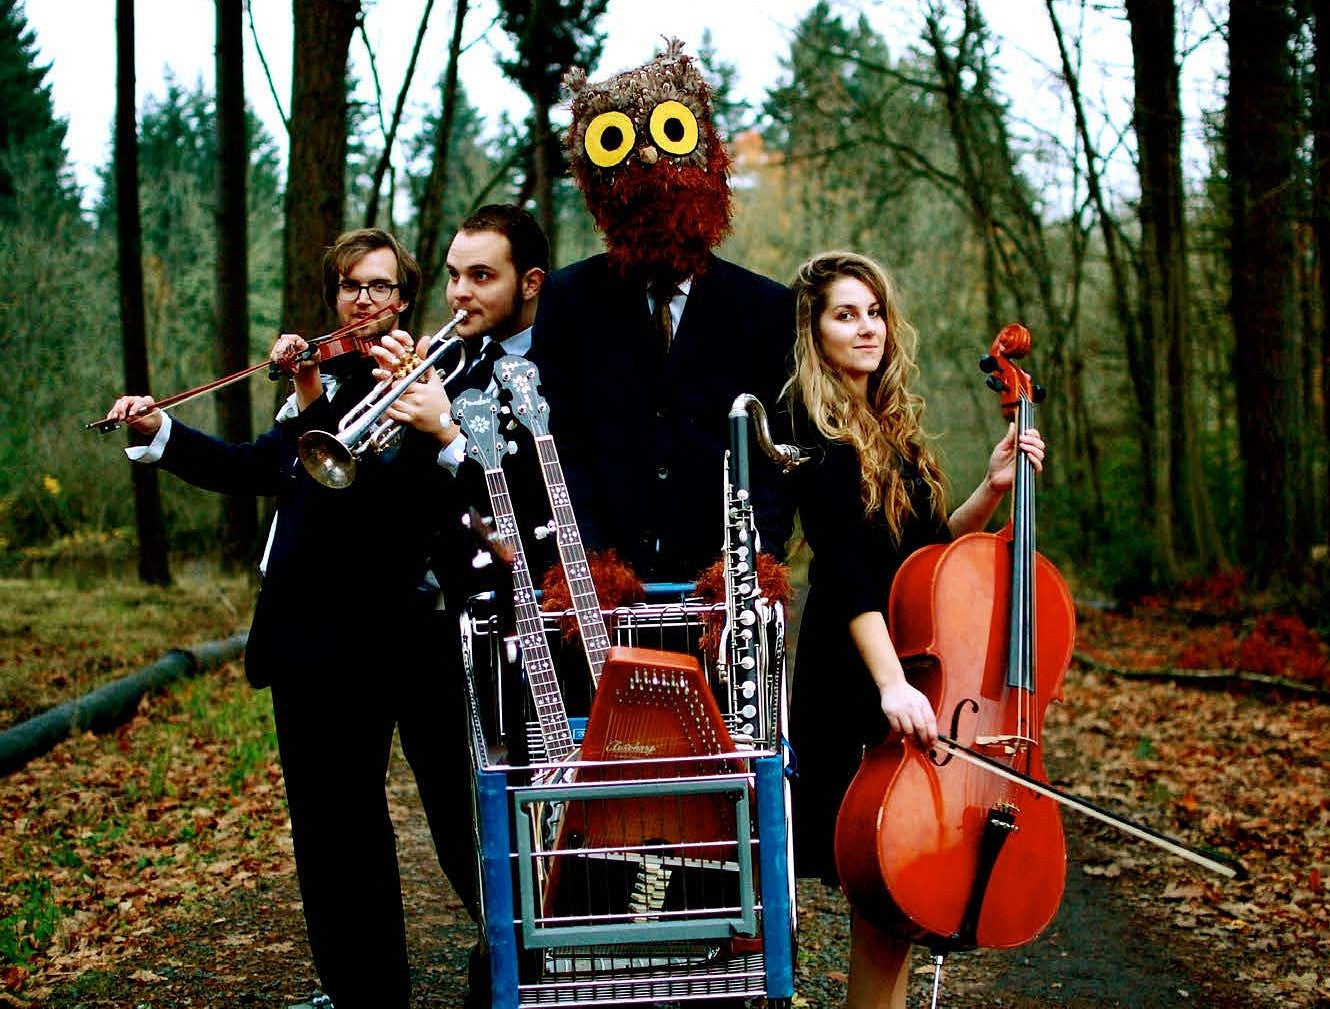 The Owltown Orchestra, photograph by Jenna Westover